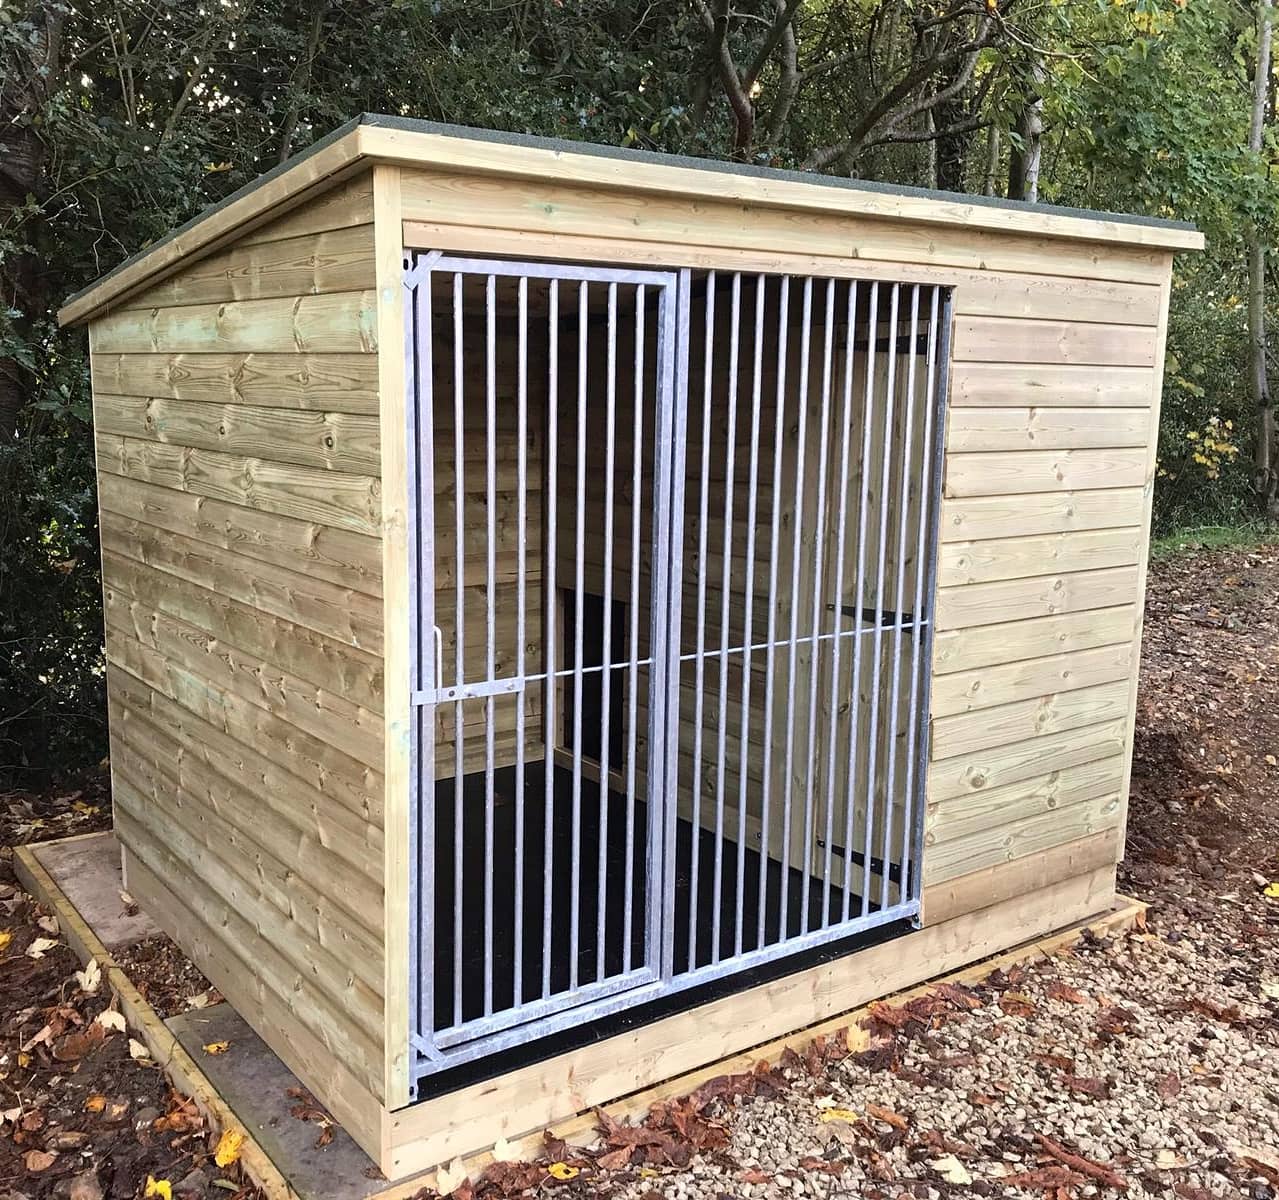 Chesterfield Dog Kennel 8ft (wide) x 6ft (depth) x 5'7ft (high)